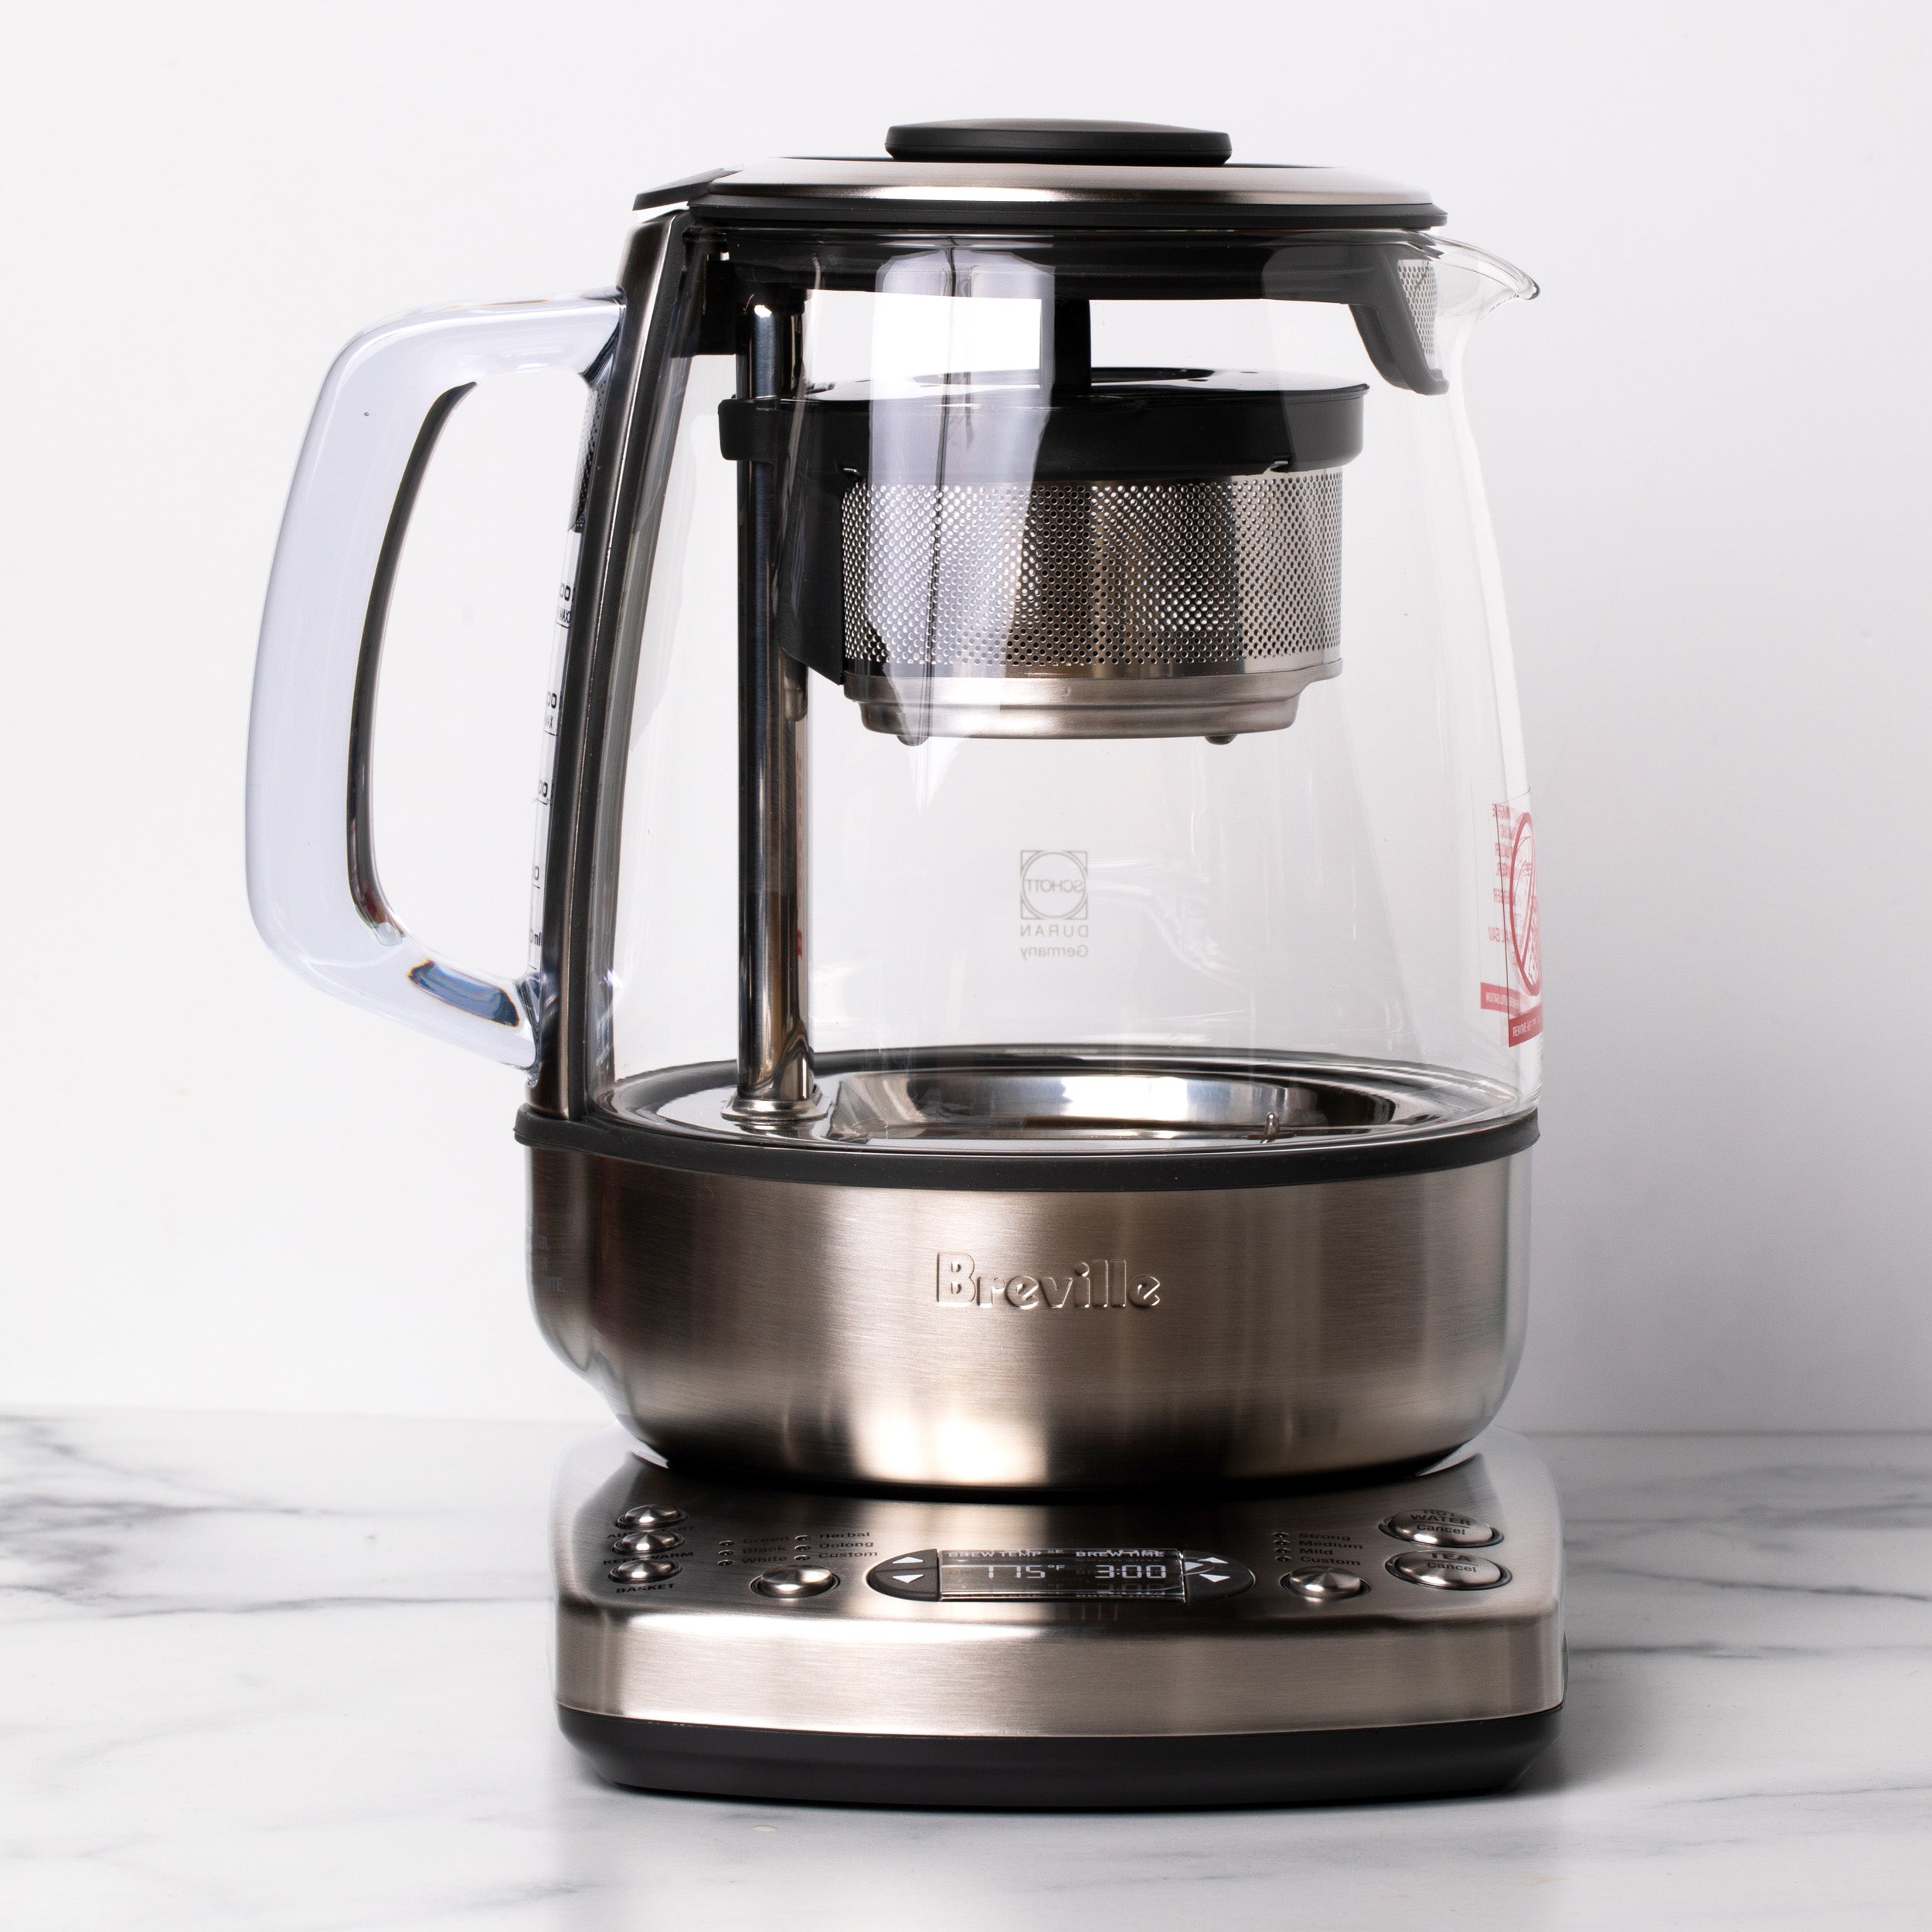 Breville One-Touch Teamaker